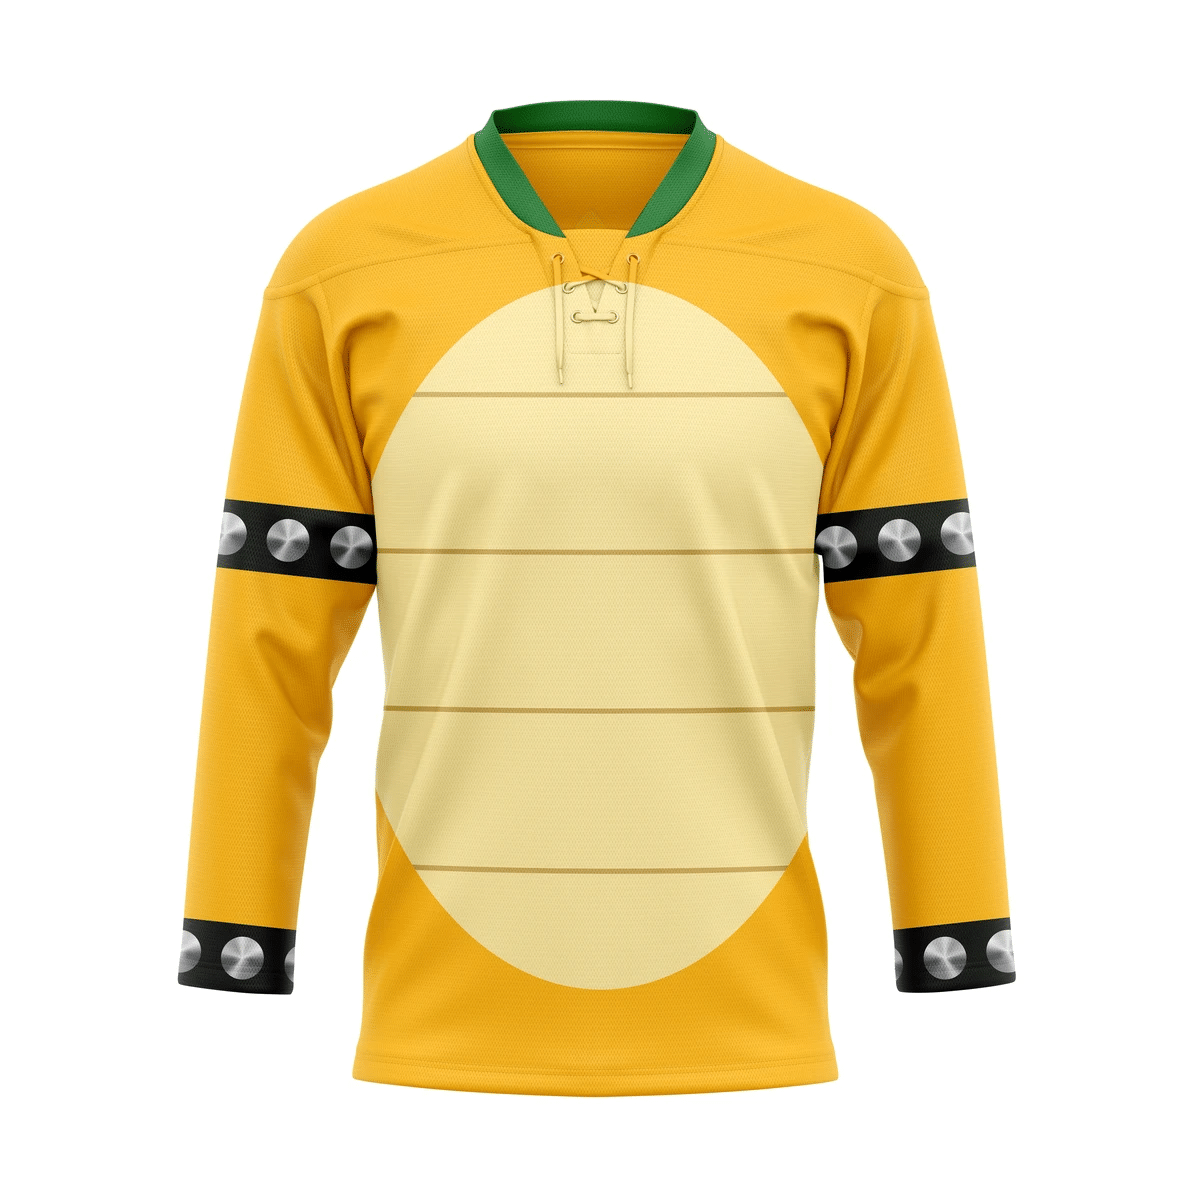 Top cool Hockey jersey for fan You can buy online. 139